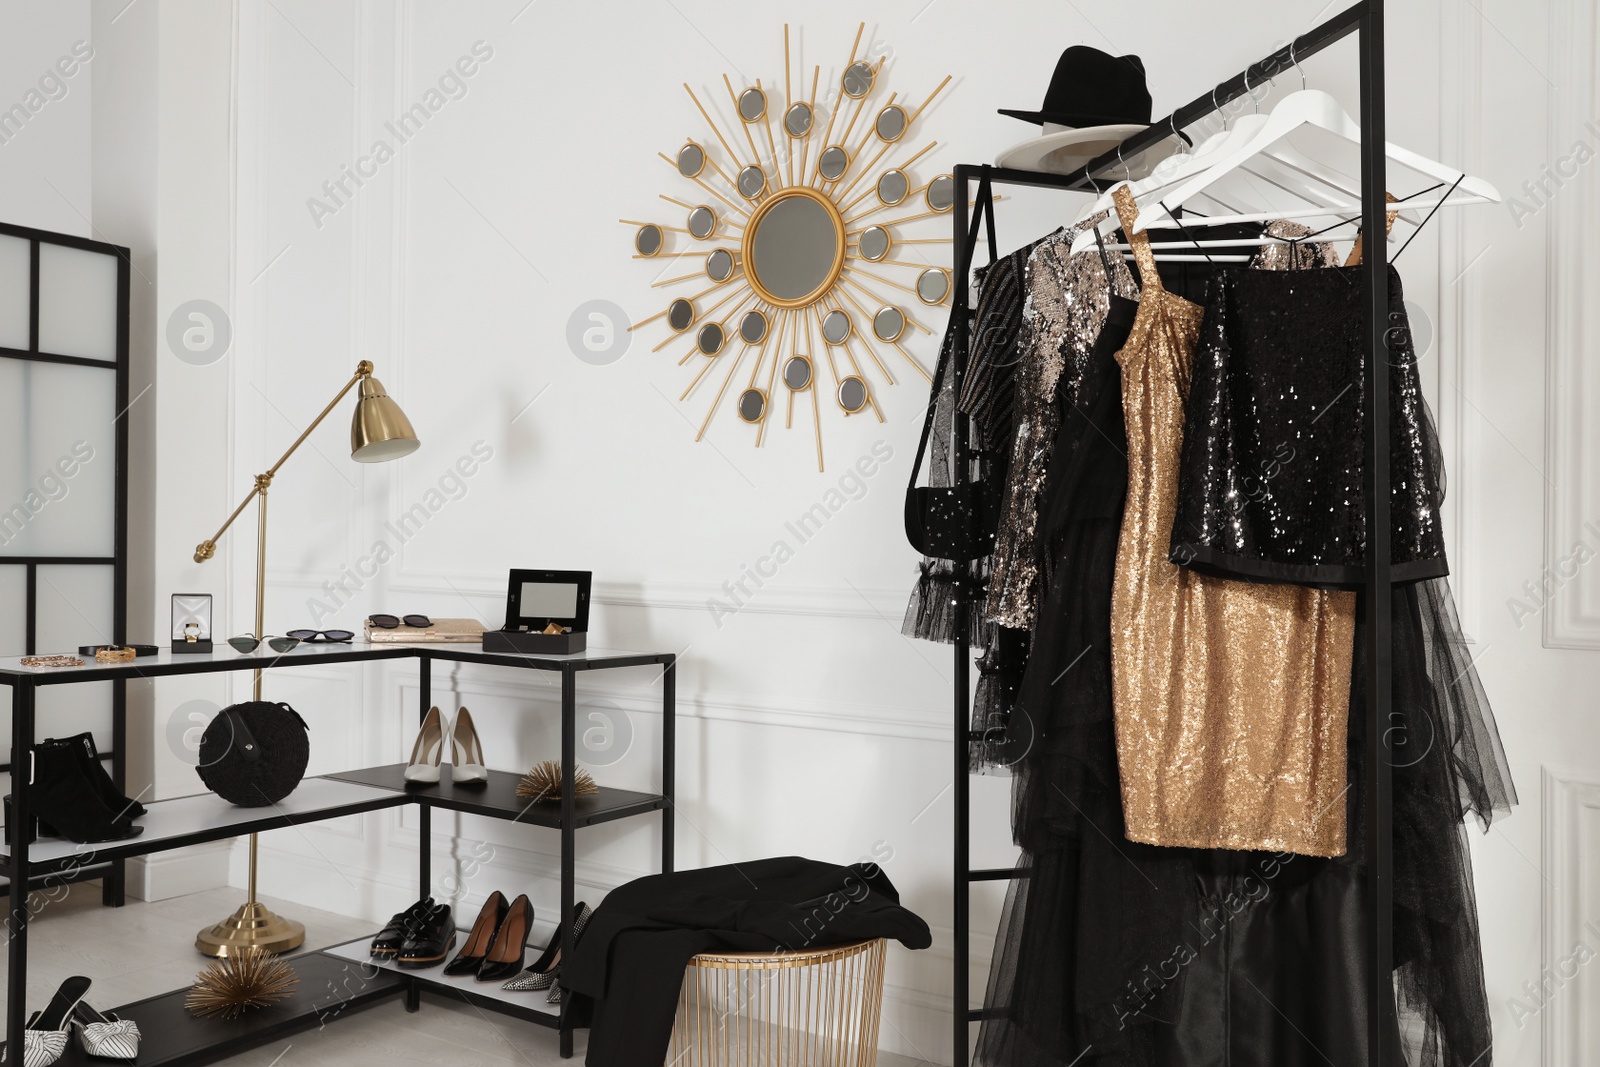 Photo of Rack with stylish women's clothes and accessories in dressing room